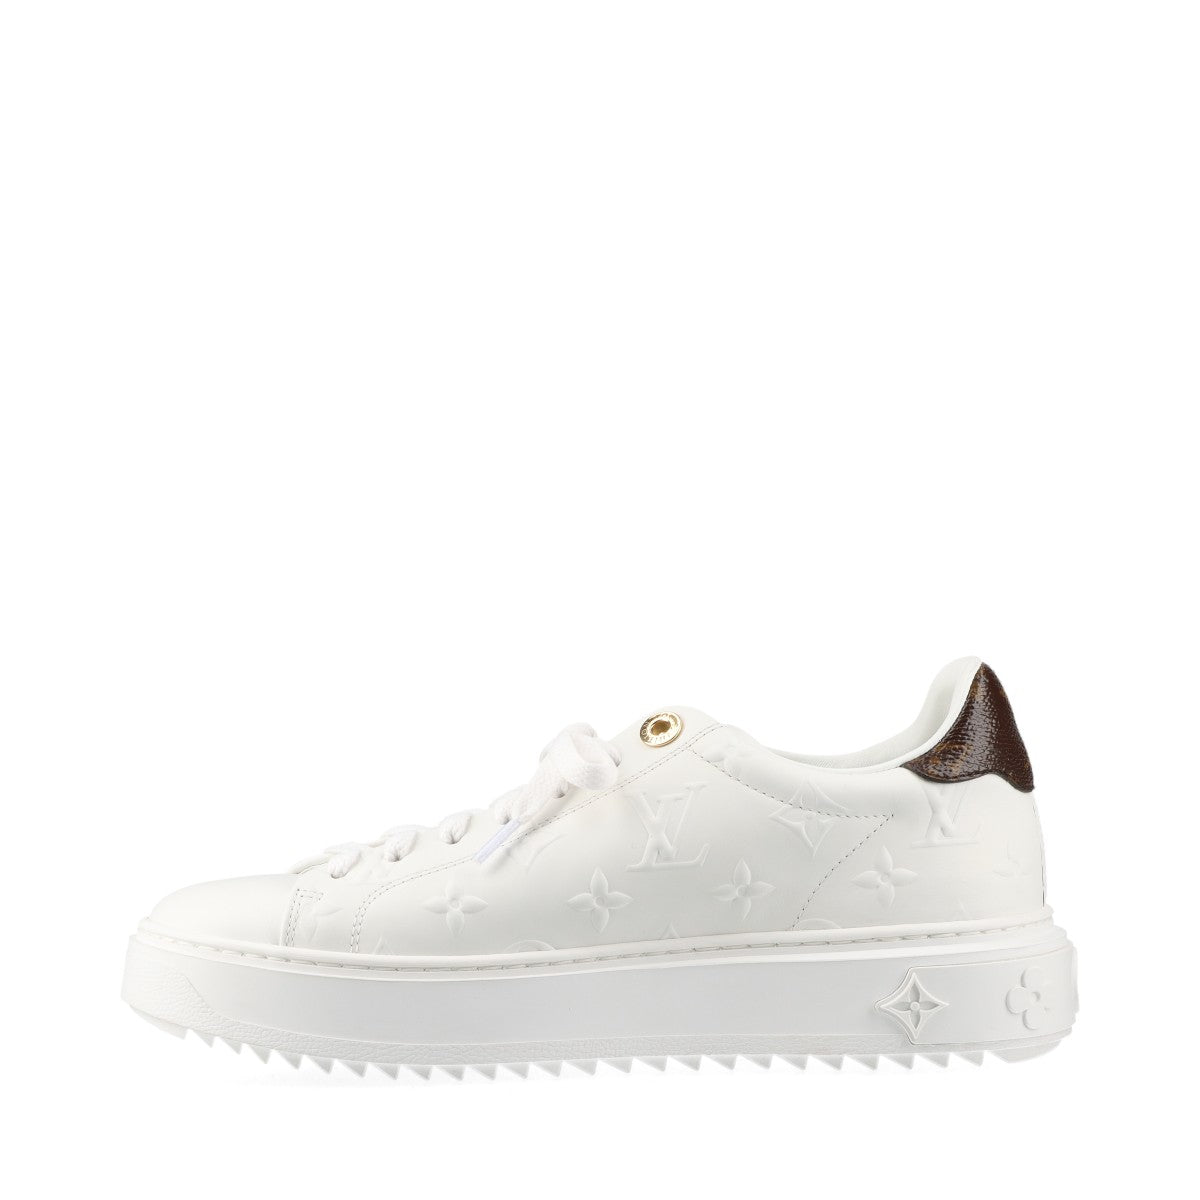 Louis Vuitton Timeout line 22 years PVC & leather Sneakers 37 Ladies' White x brown DD0232 Monogram There is a storage bag